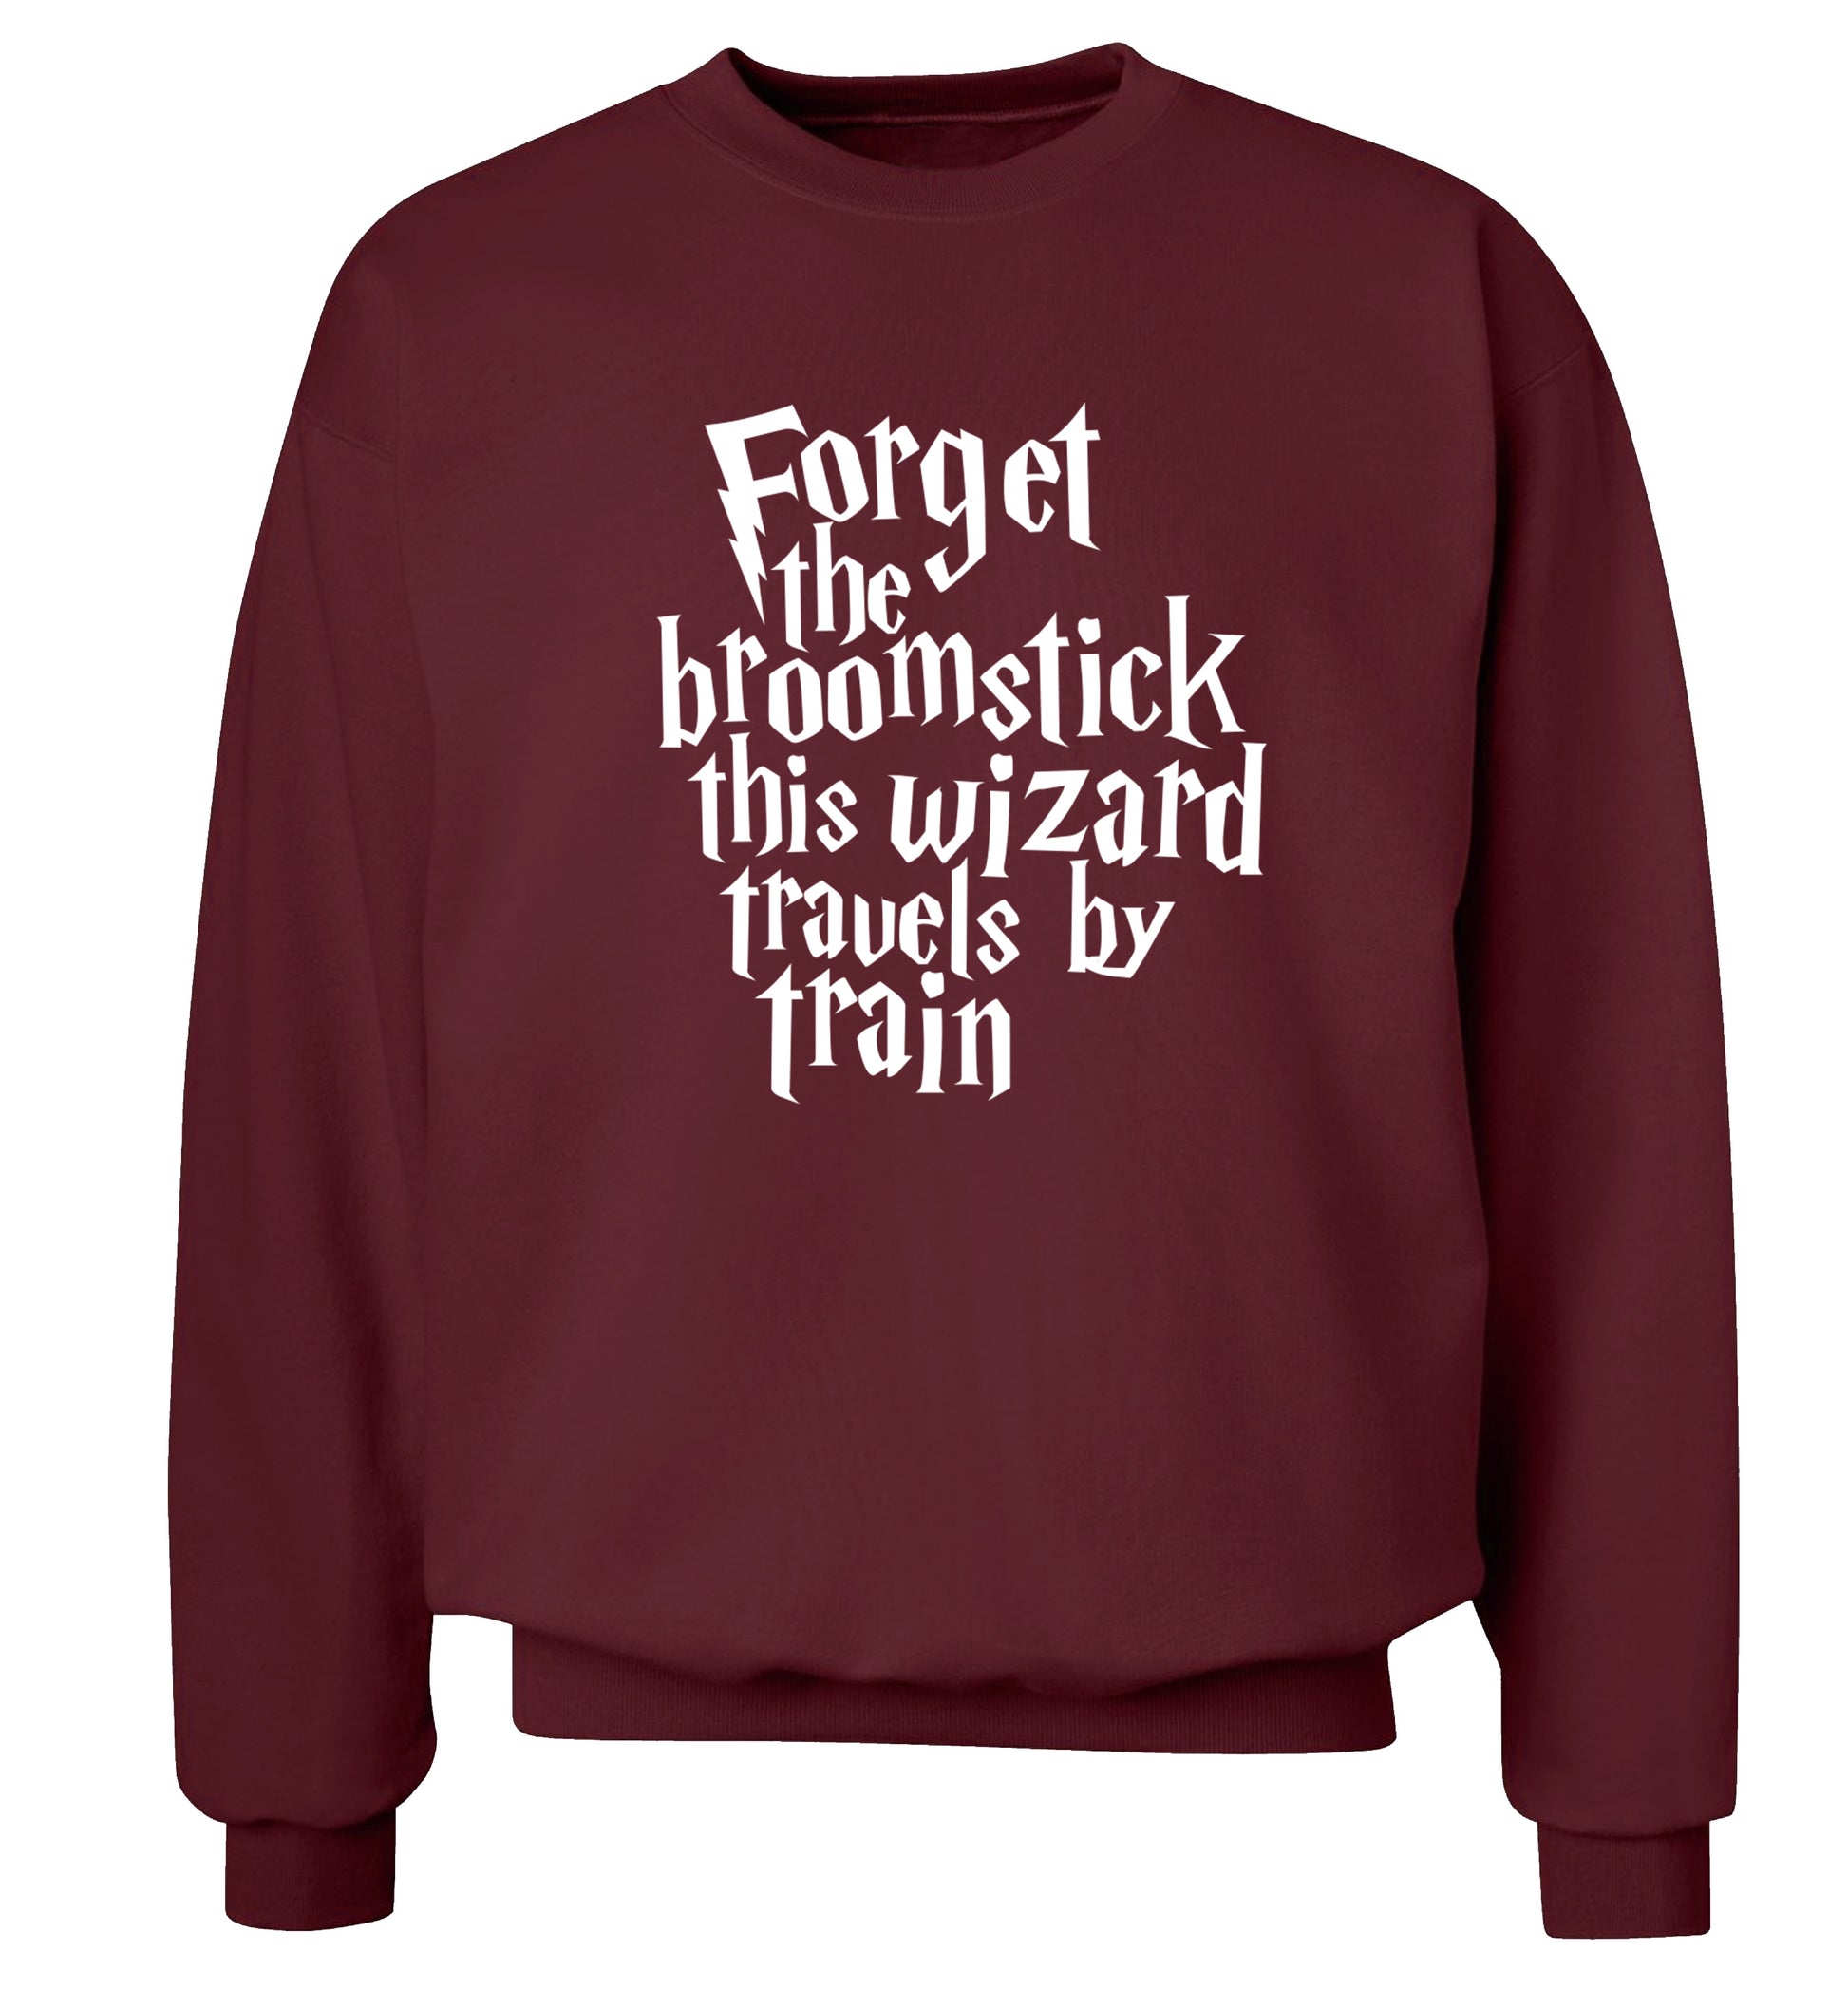 Forget the broomstick this wizard travels by train Adult's unisexmaroon Sweater 2XL